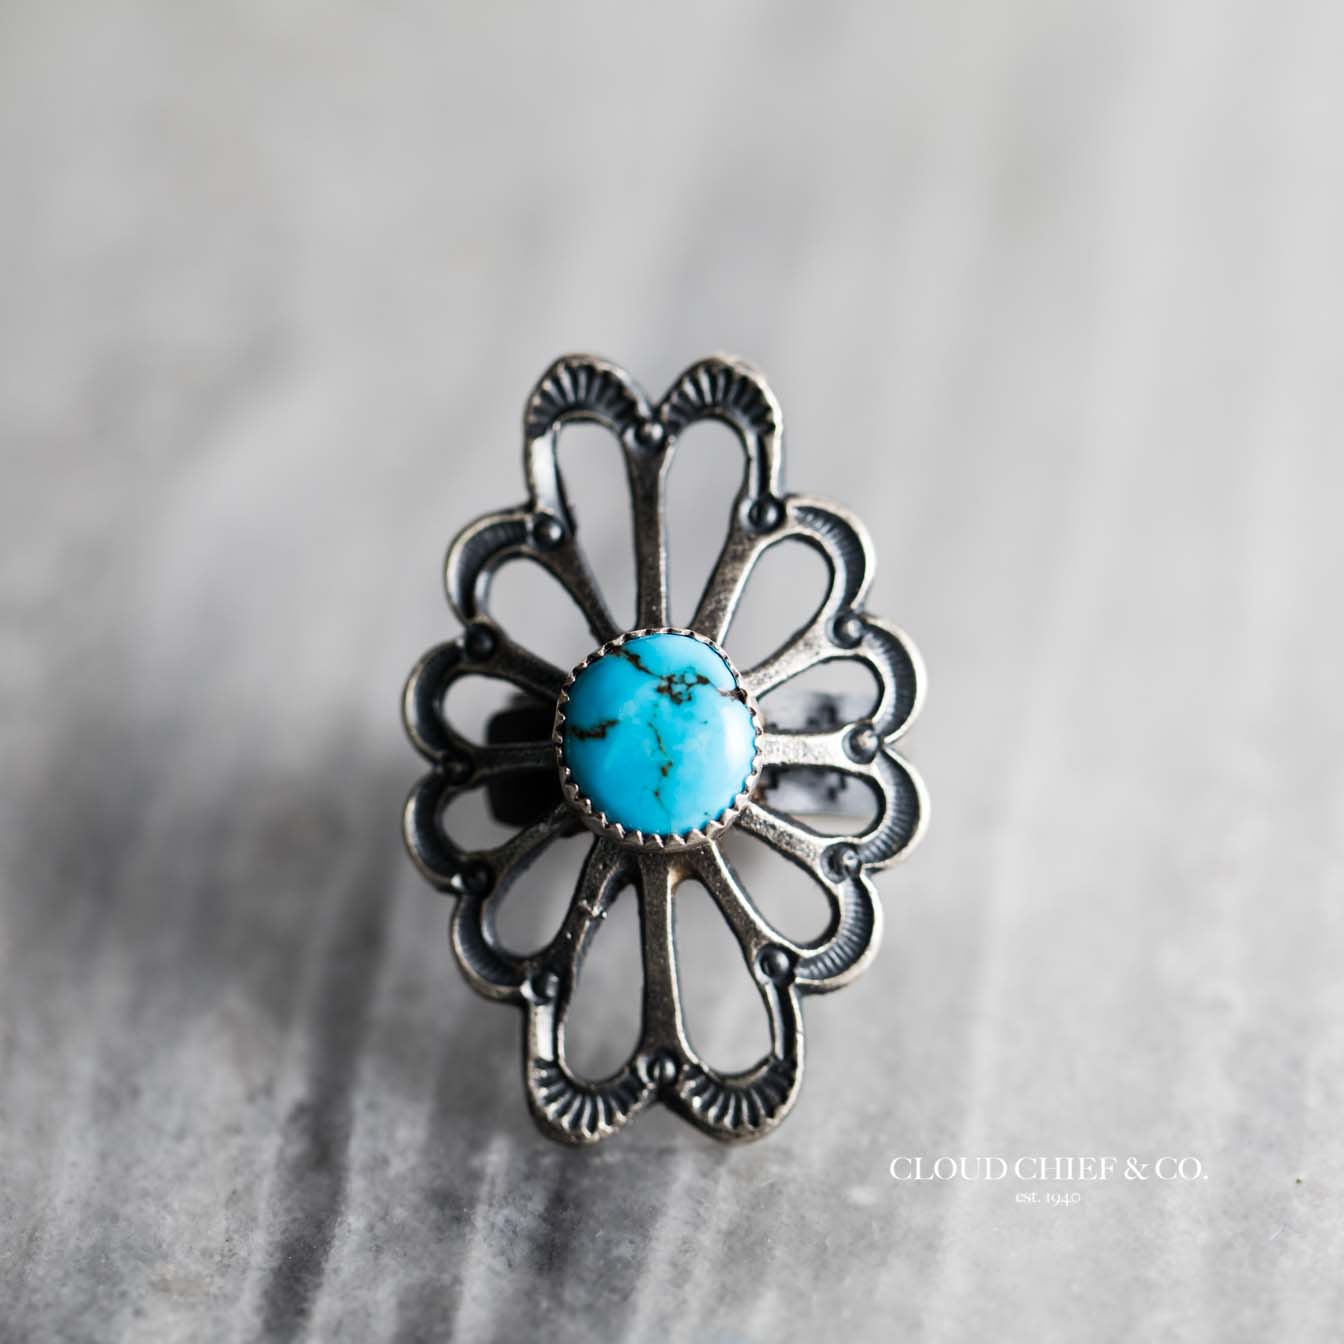 Boho Turquoise Ring, Sterling Silver Ring for Women, Statement Ring, Big  Stone Gemstone Ring, Chunky Cocktail Ring, Bohemian Jewelry - Etsy